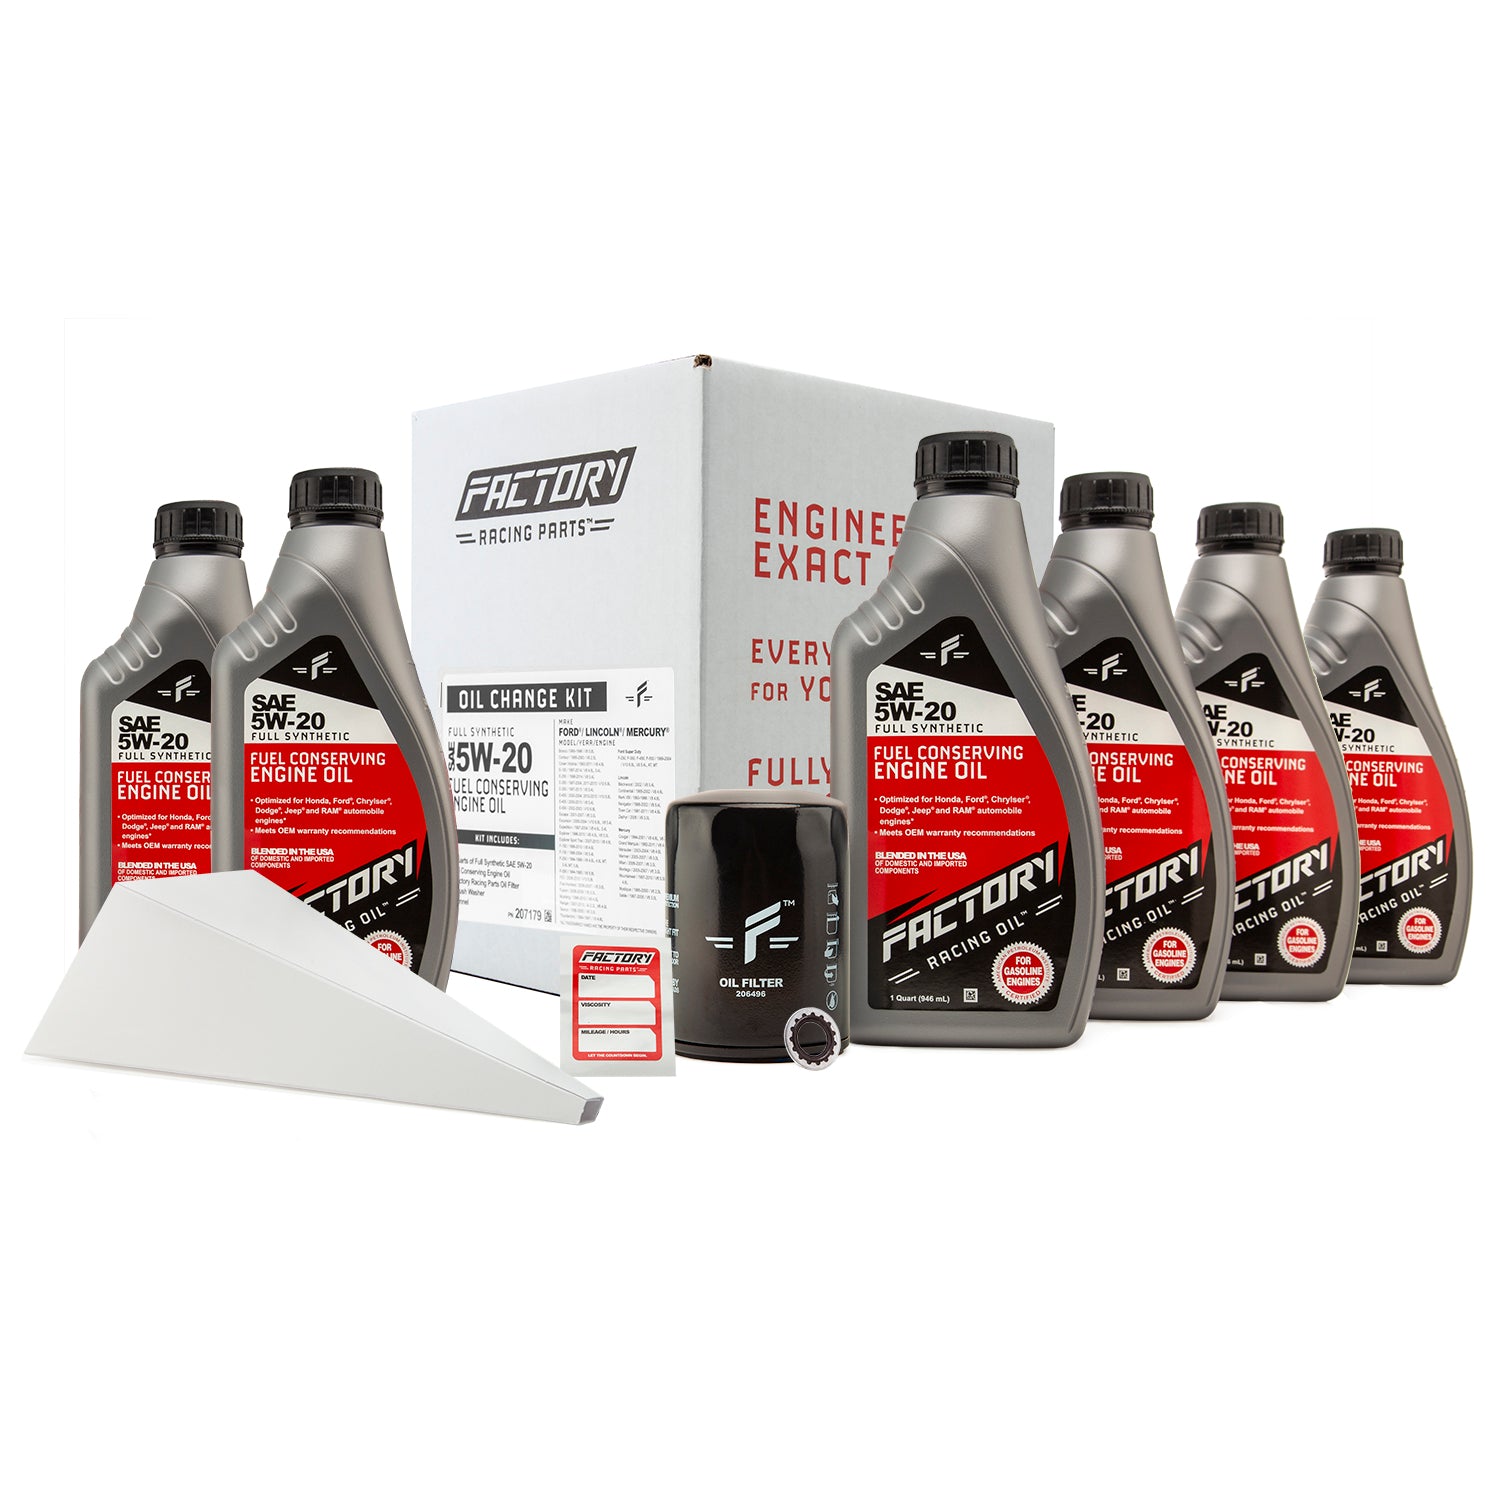 Kit d'inspection Ford Focus+ Mannol Extreme 5W40 5L